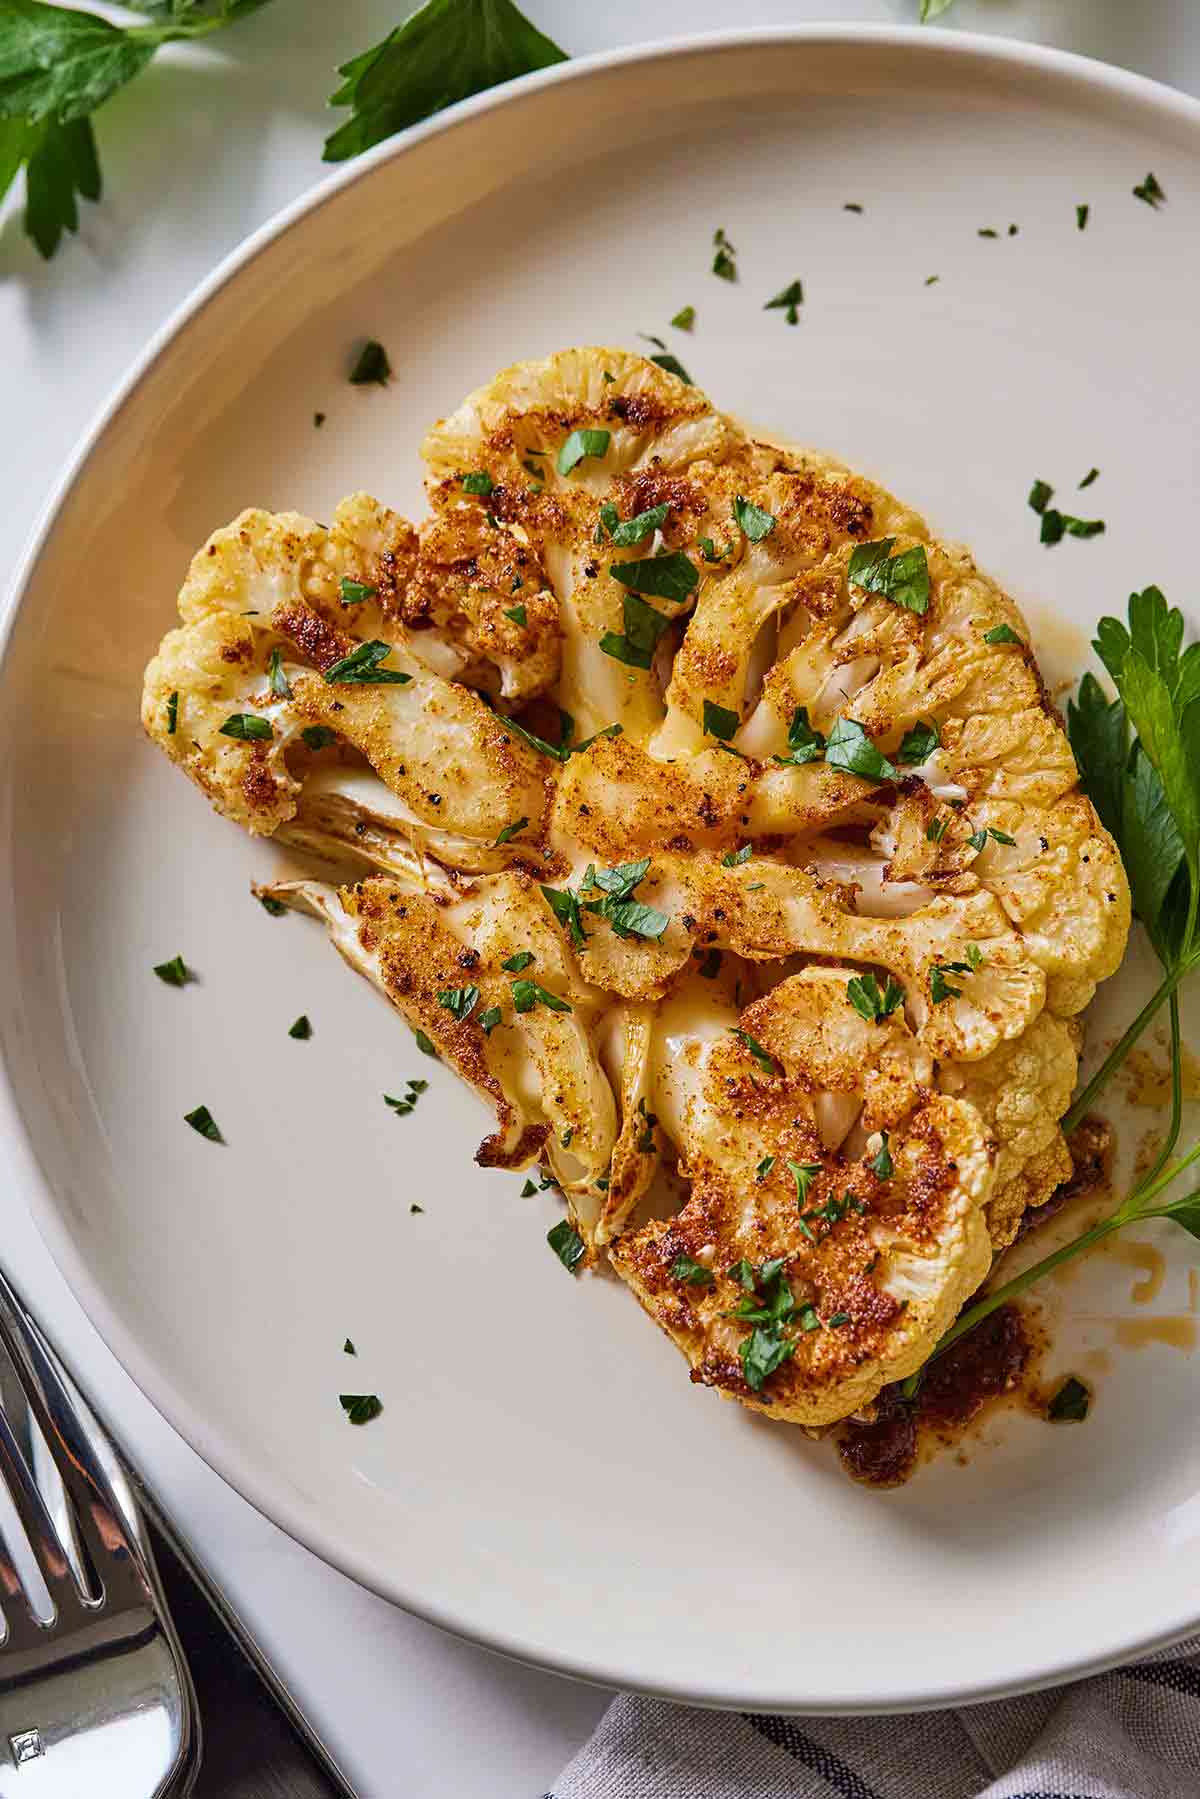 Overhead view of a plate of cauliflower steak with parsley garnished on top.